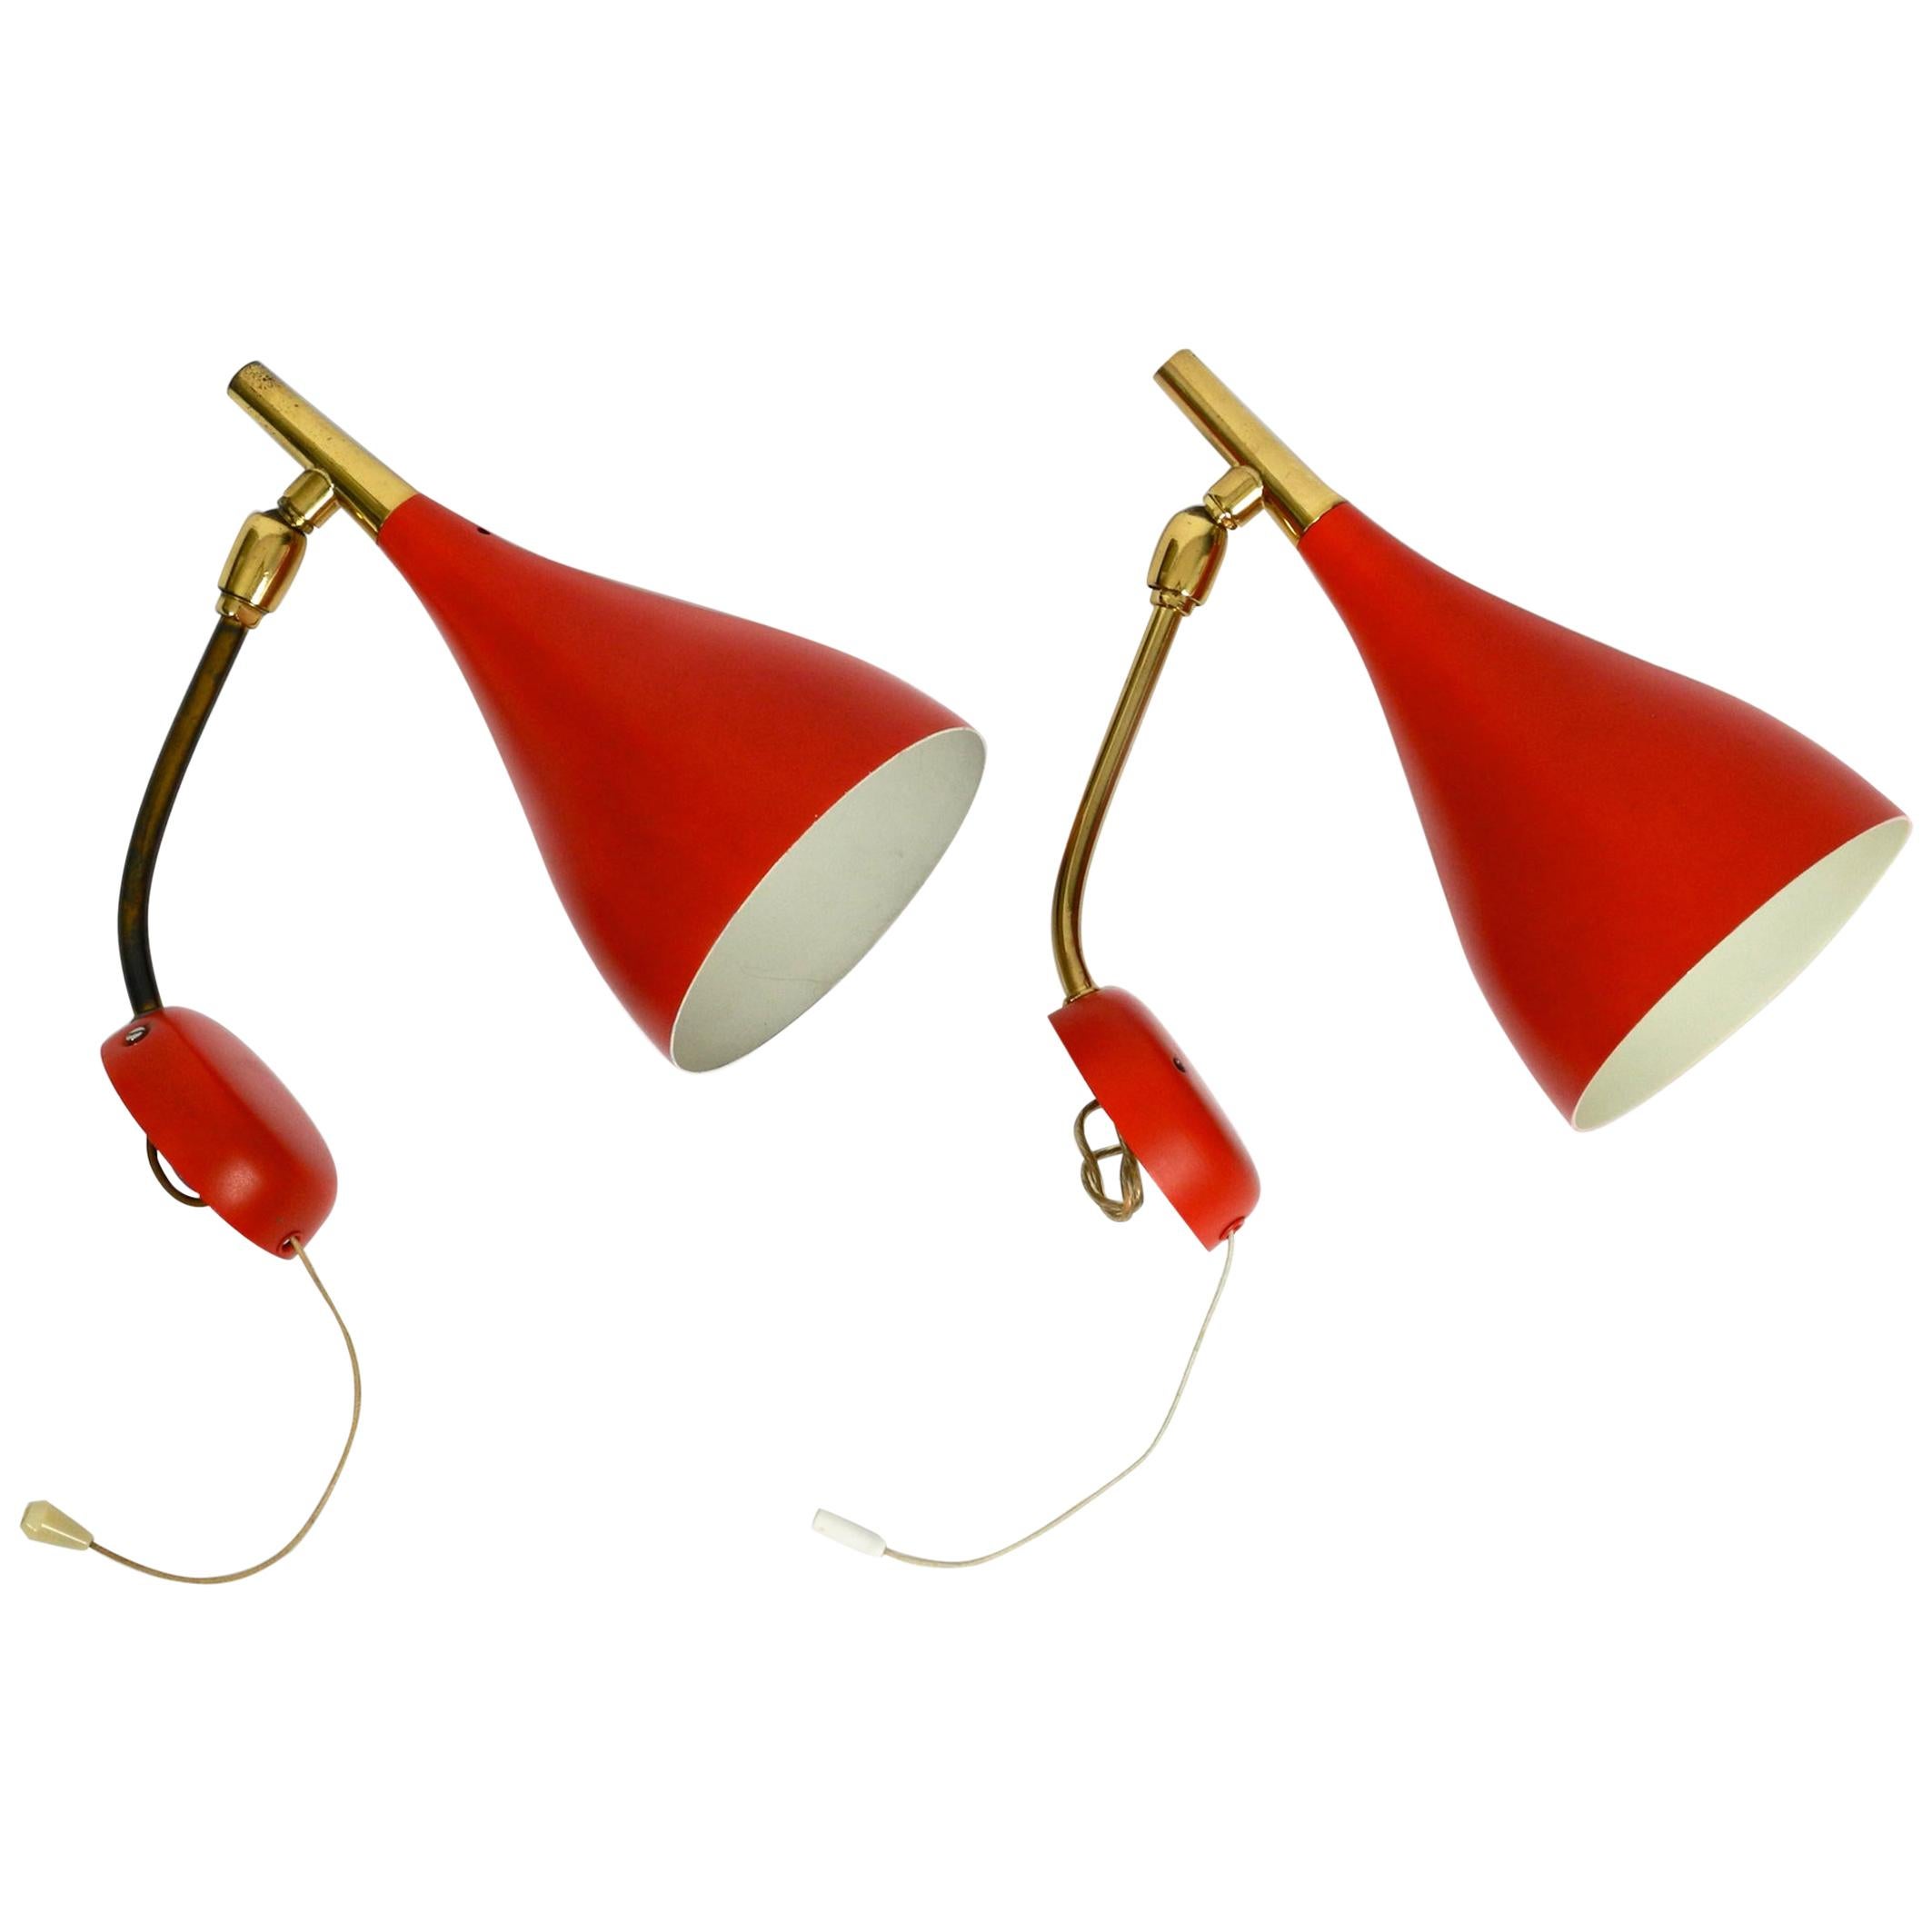 Pair of Midcentury Wall Lights by Cosack with Original Red Lacquer